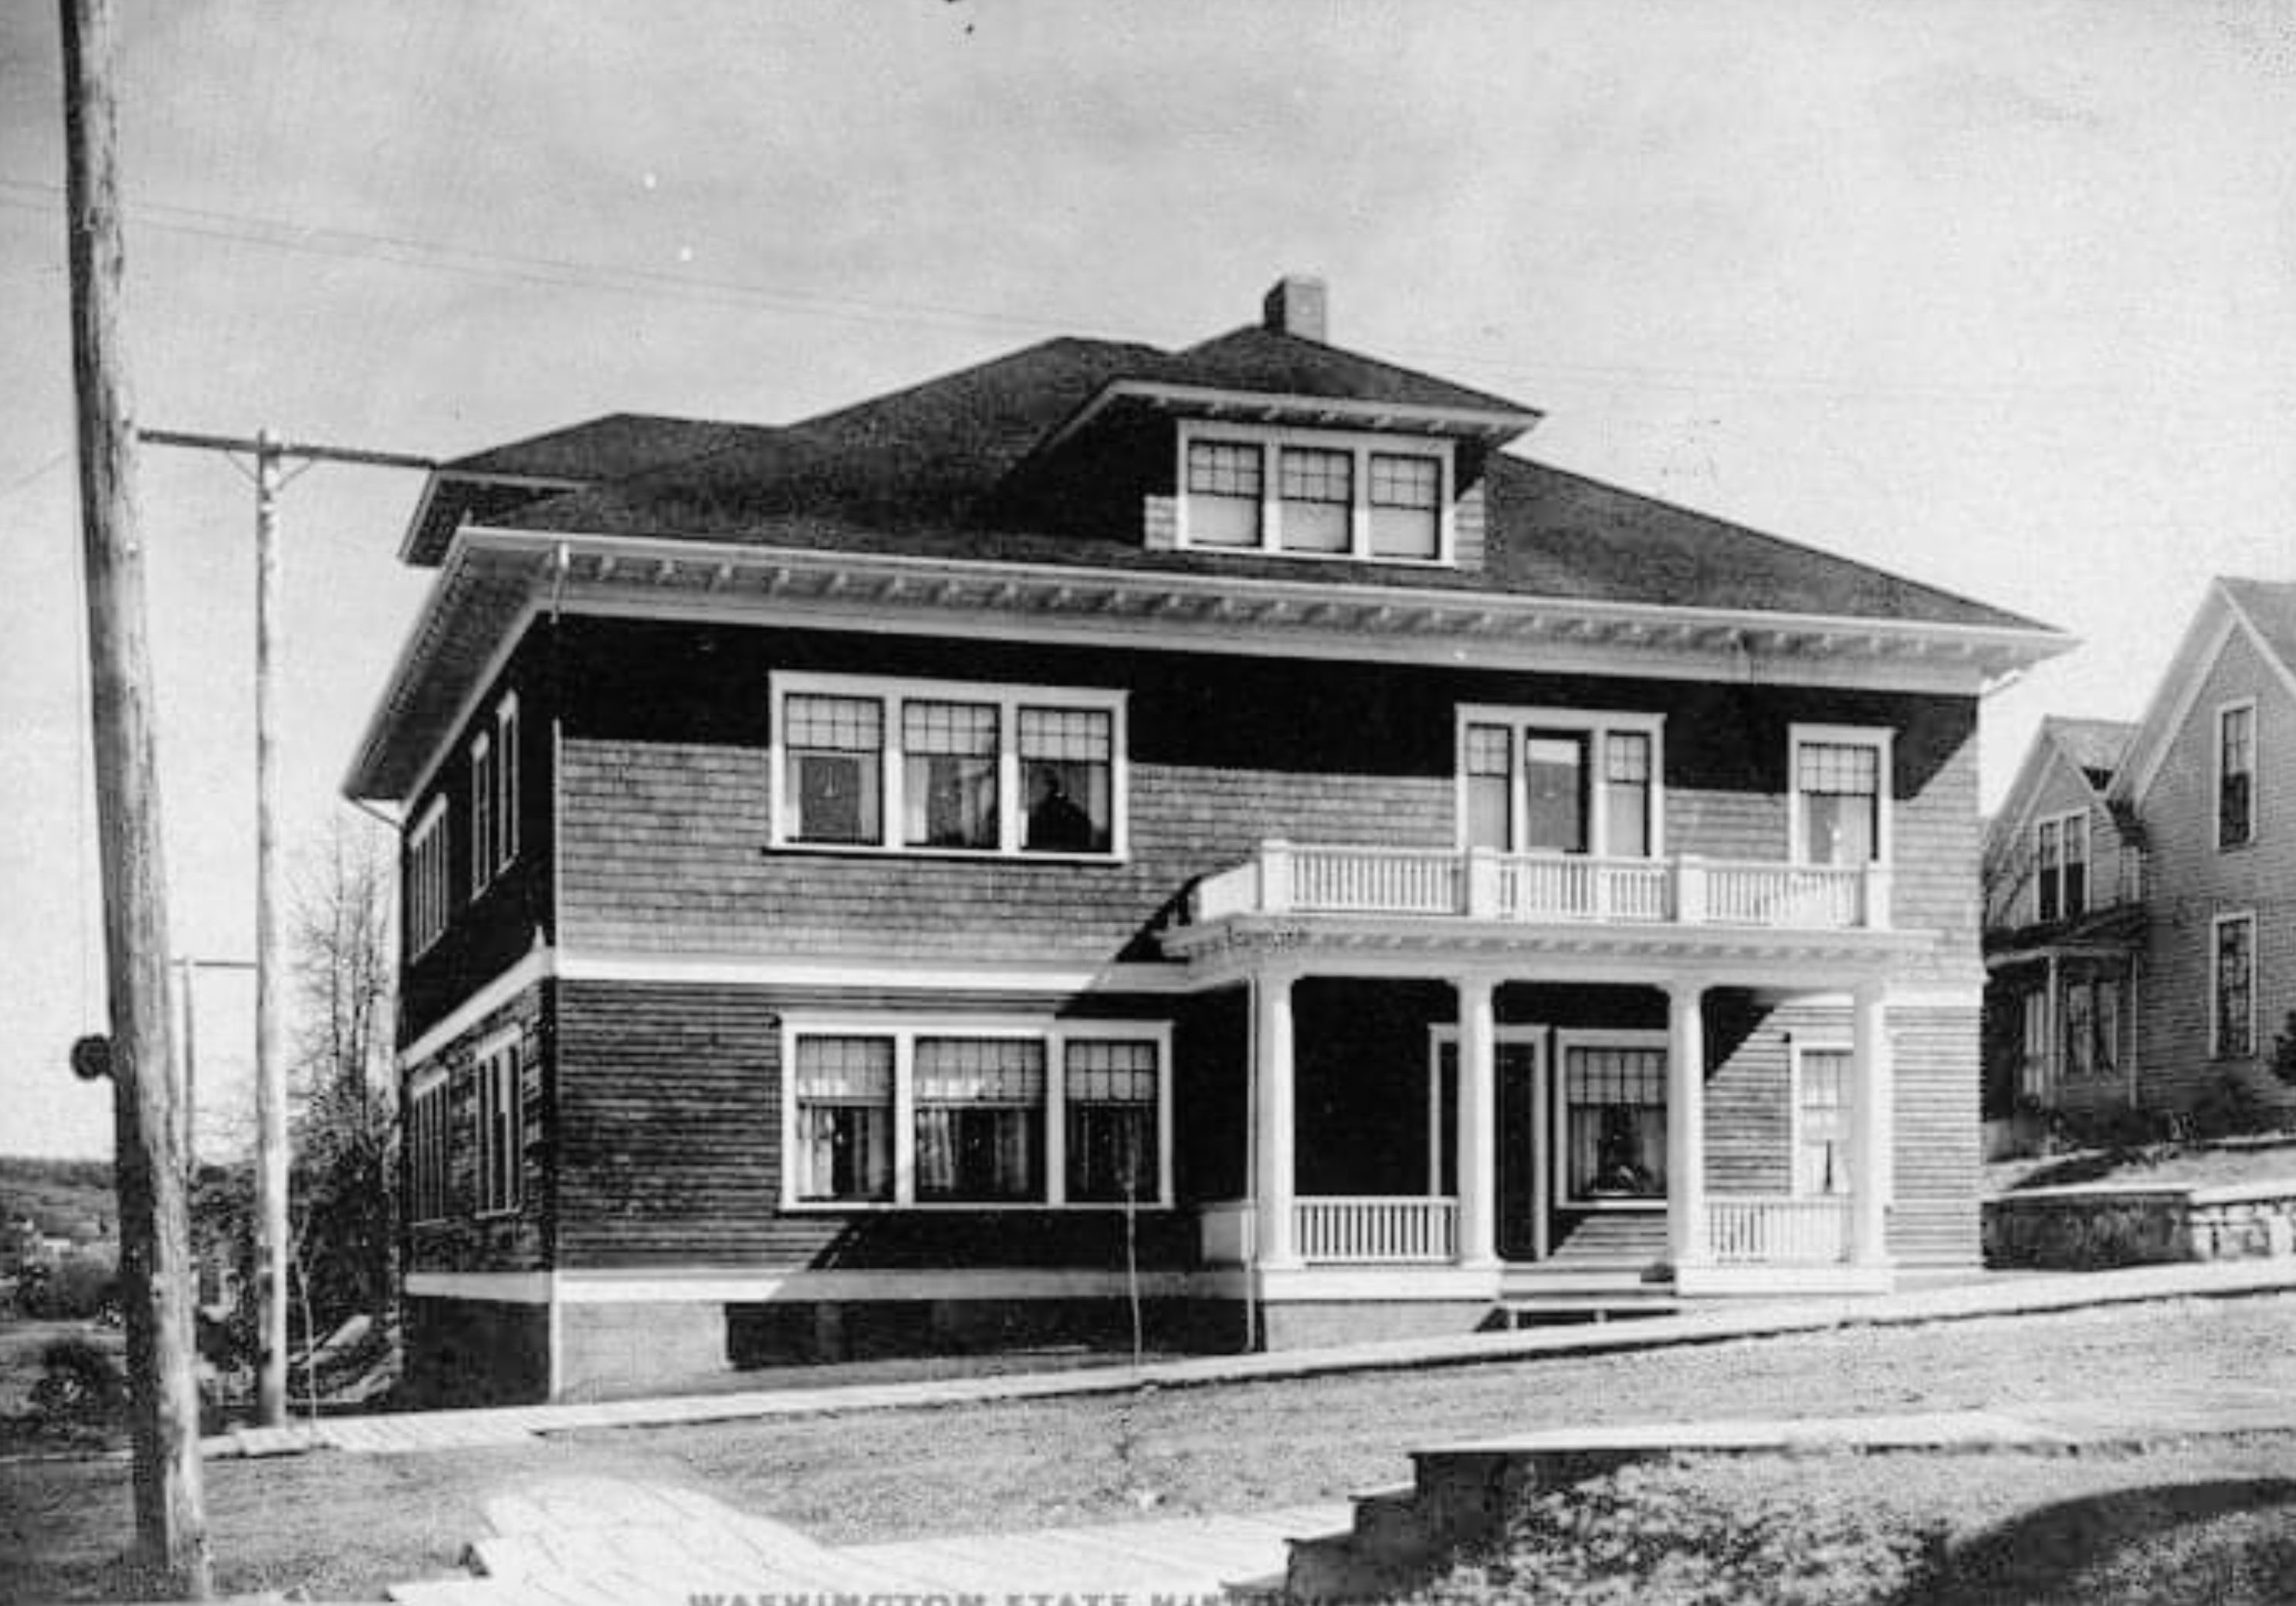 Black and white photograph of the Abigail Stuart house in Olympia WA